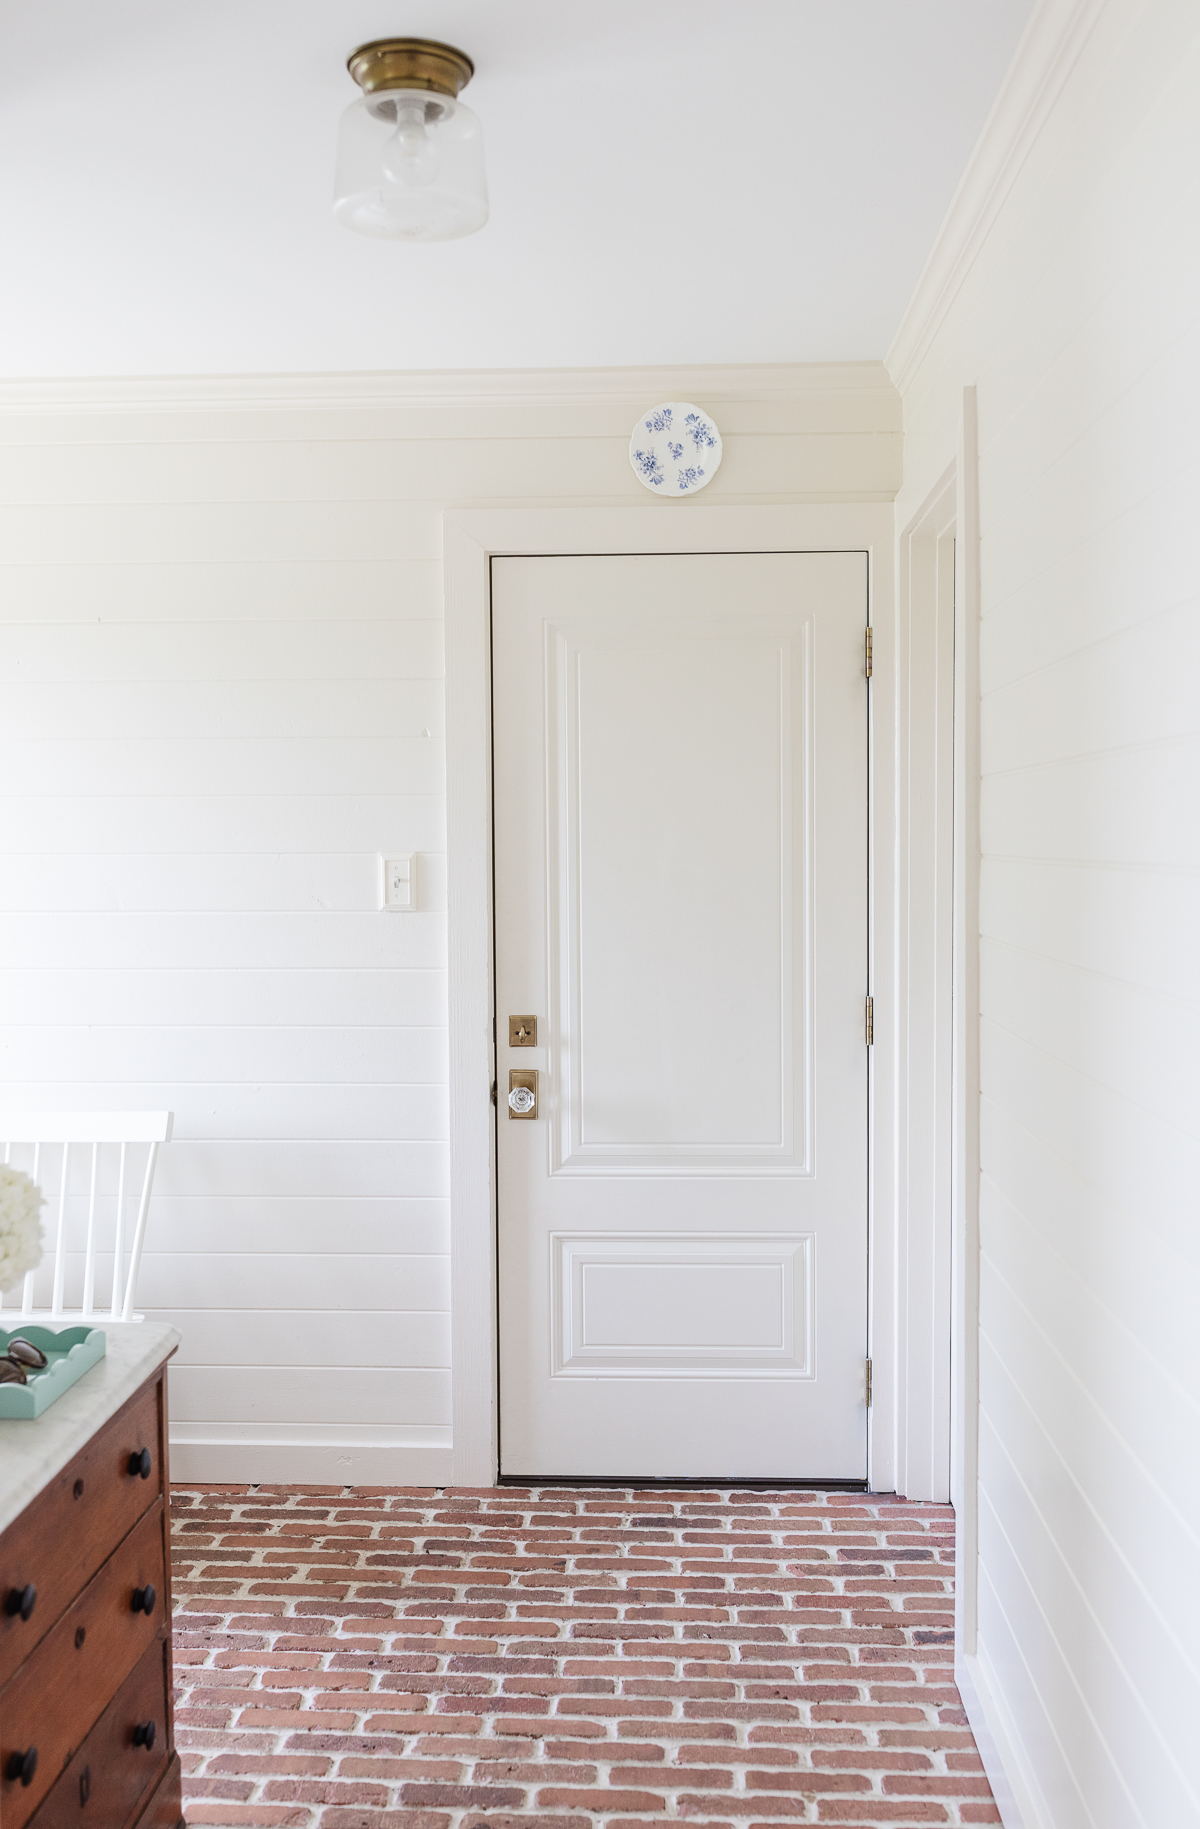 A mudroom with brick floors and paneled white walls, with a blue and white plate hanging over the door. 